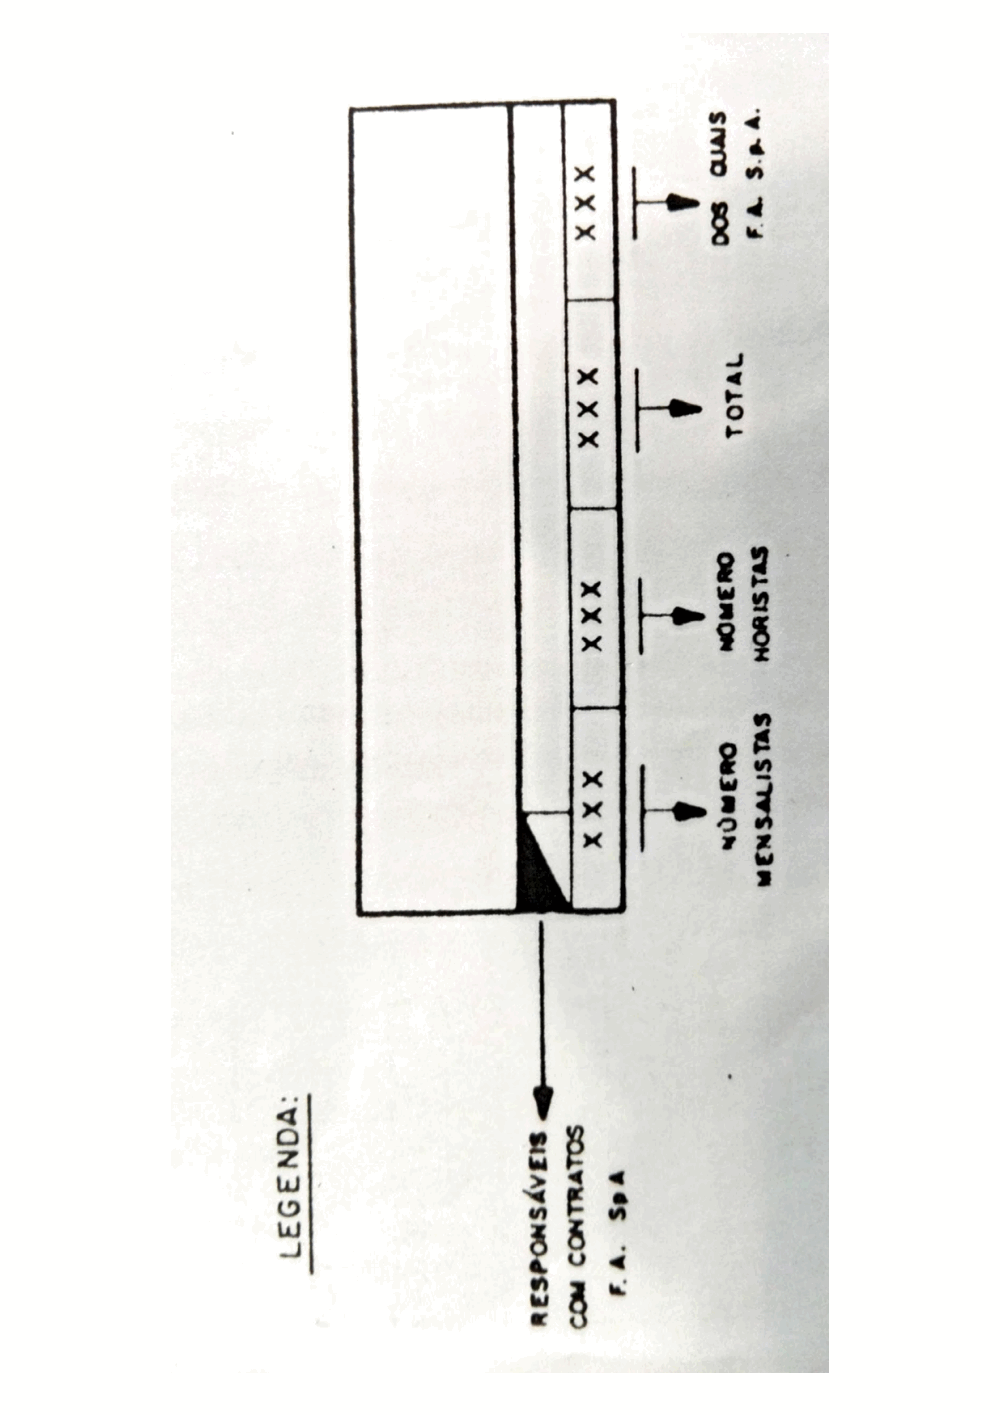 Page 6 from Archival organizational chart from Fiat’s Italian headquarters showing the Brazilian security apparatus